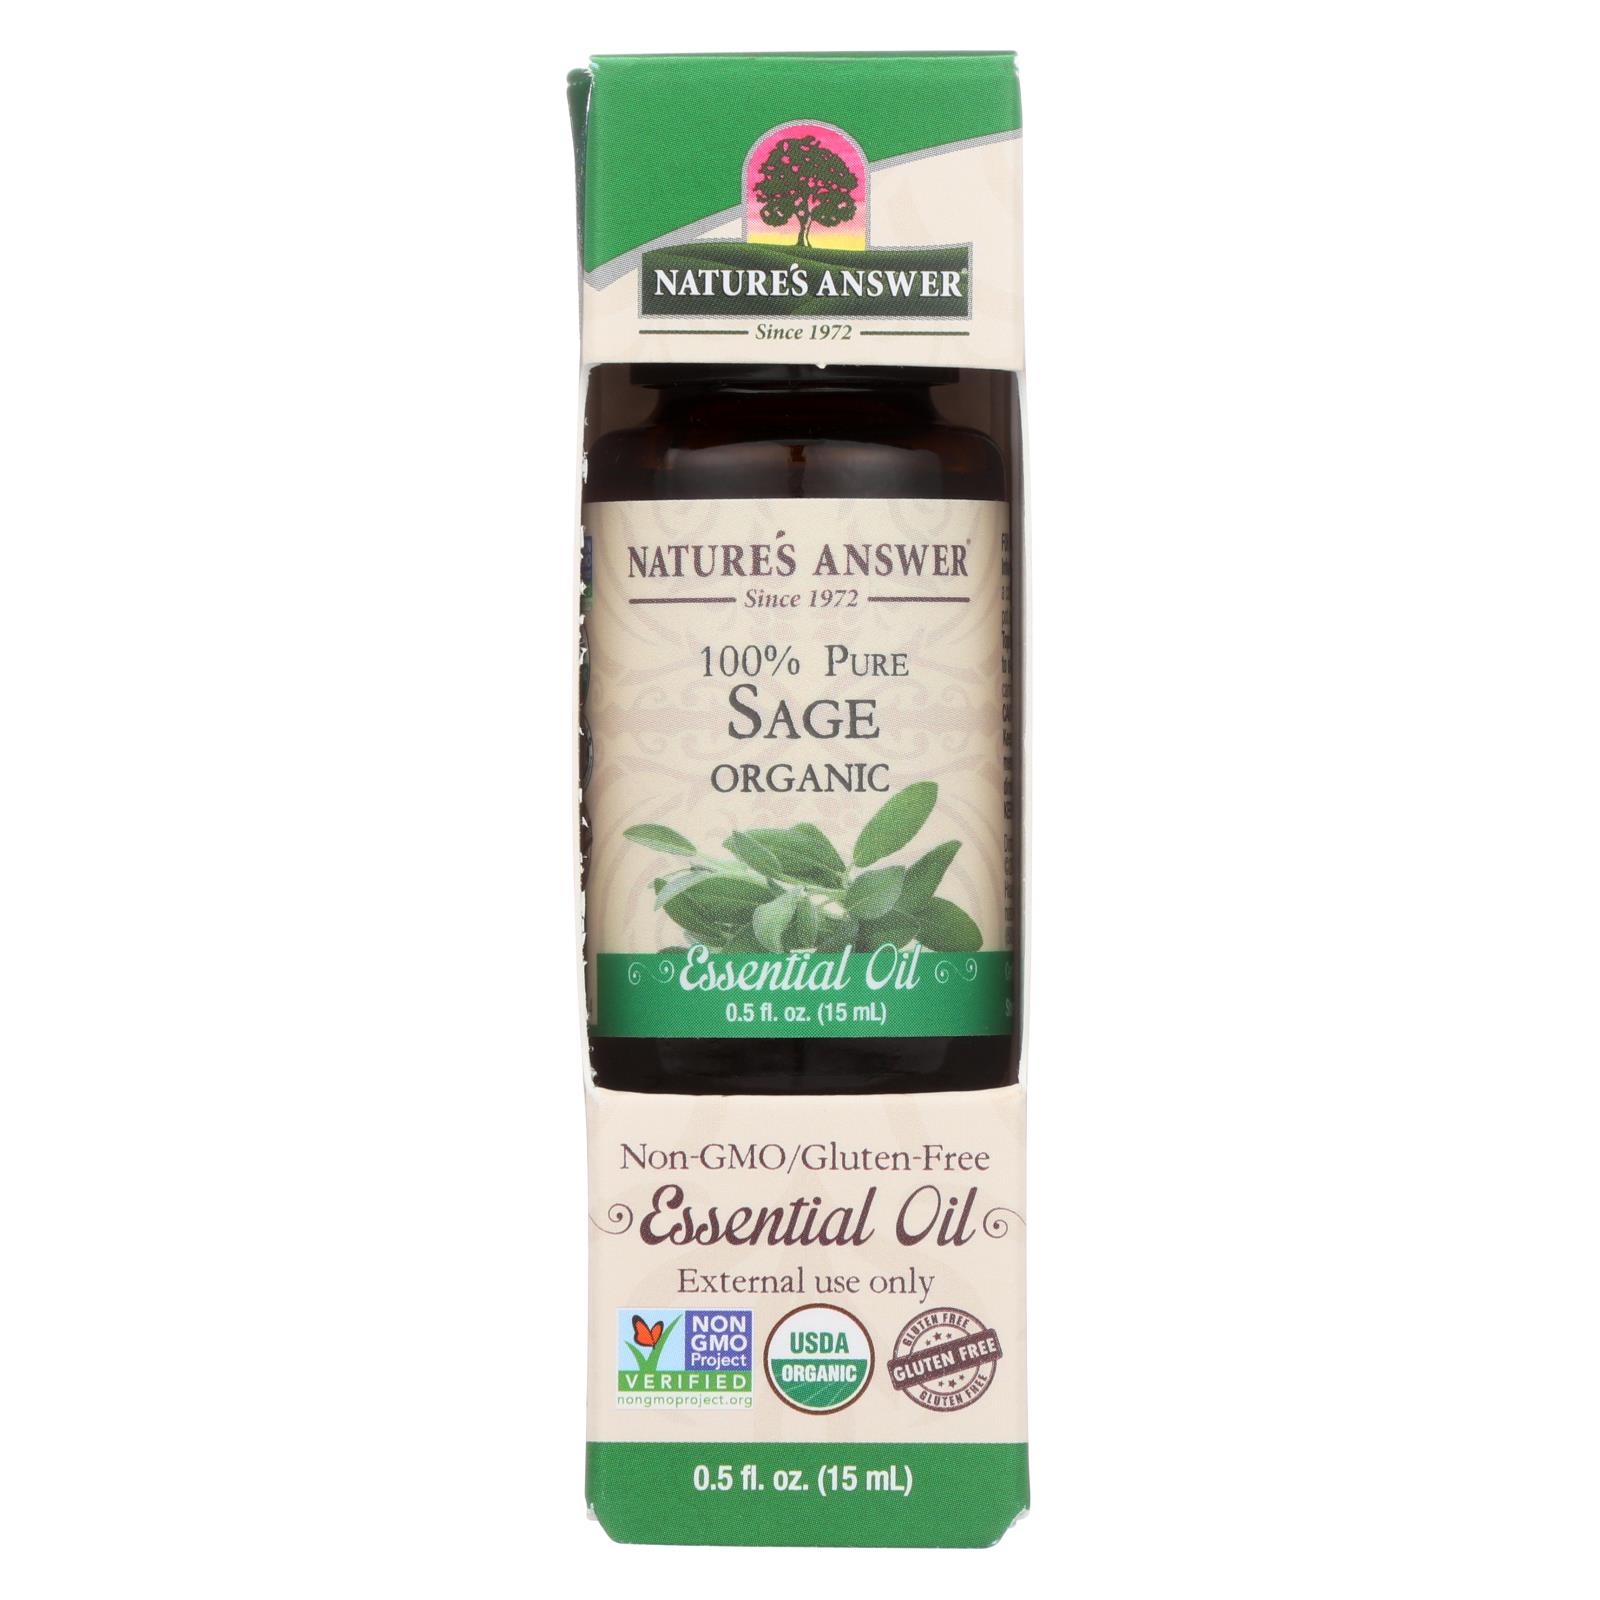 Nature's Answer - Organic Essential Oil - Sage - 0.5 oz.